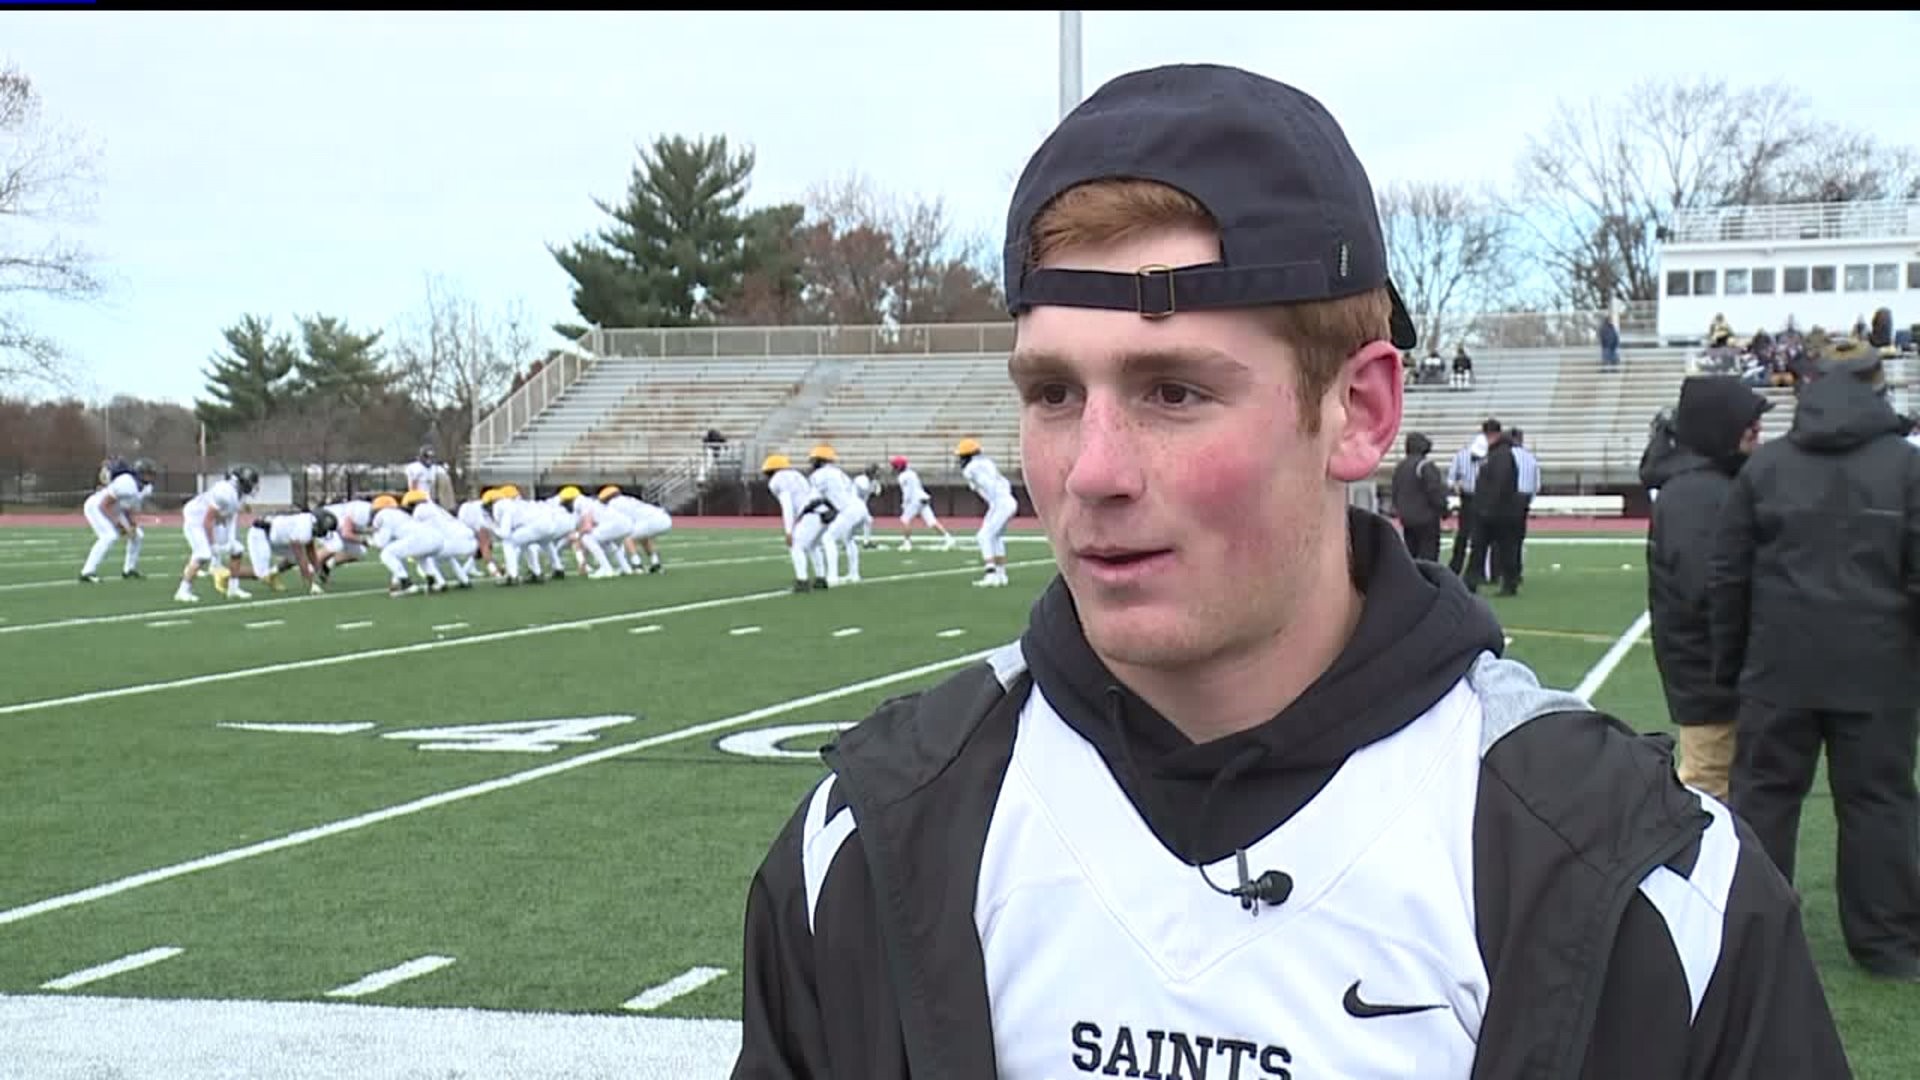 Berks Catholic football player diagnosed with stage 3 brain cancer